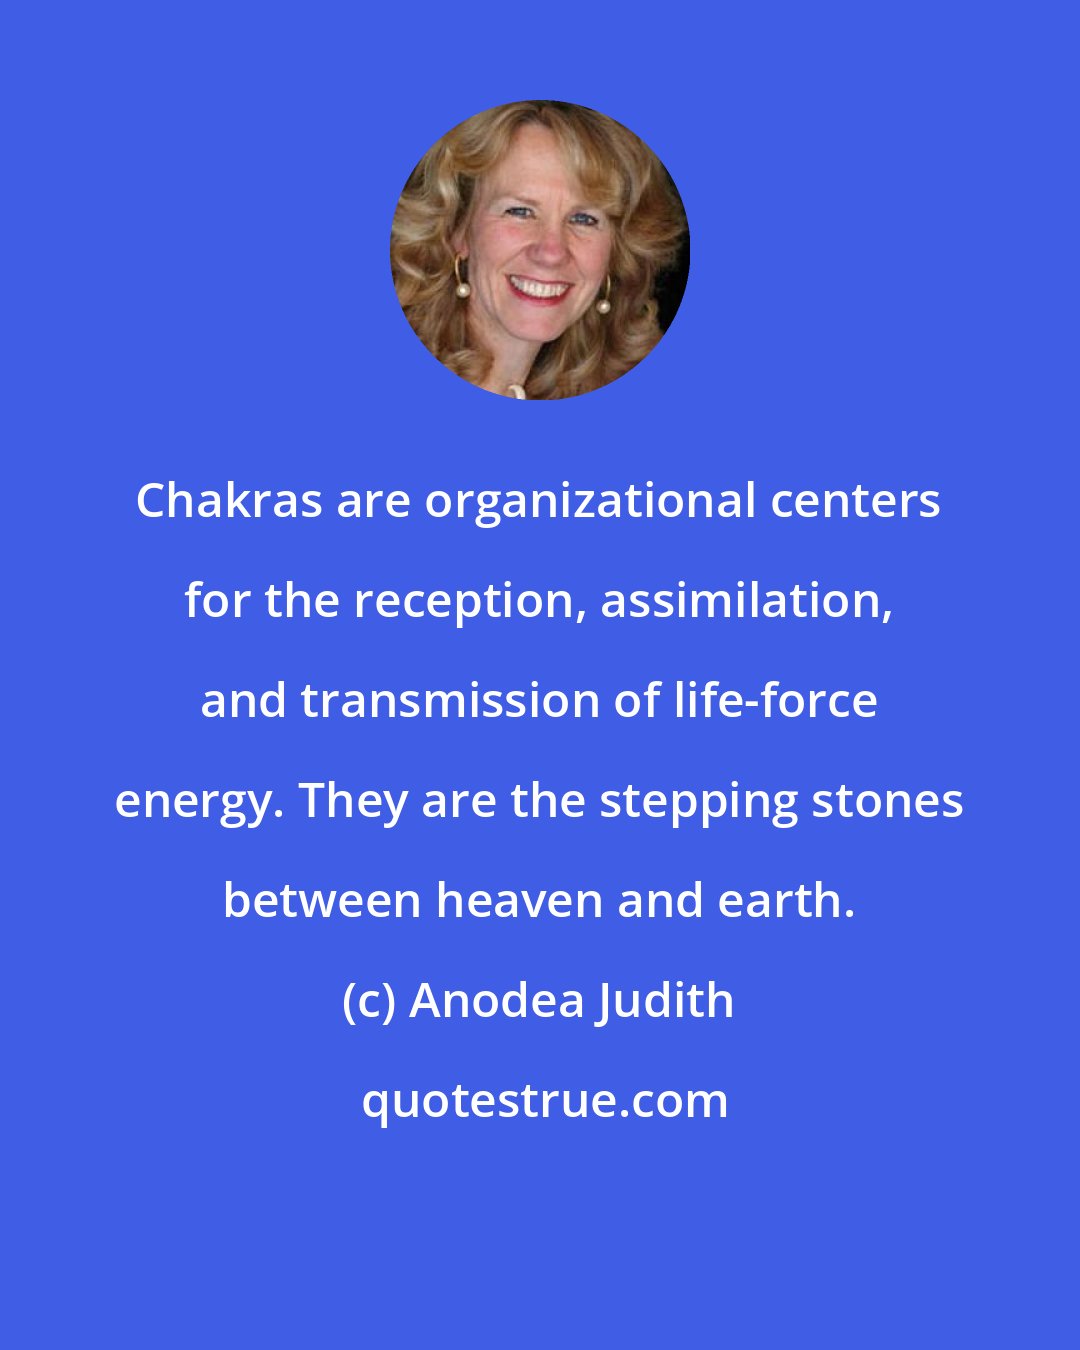 Anodea Judith: Chakras are organizational centers for the reception, assimilation, and transmission of life-force energy. They are the stepping stones between heaven and earth.